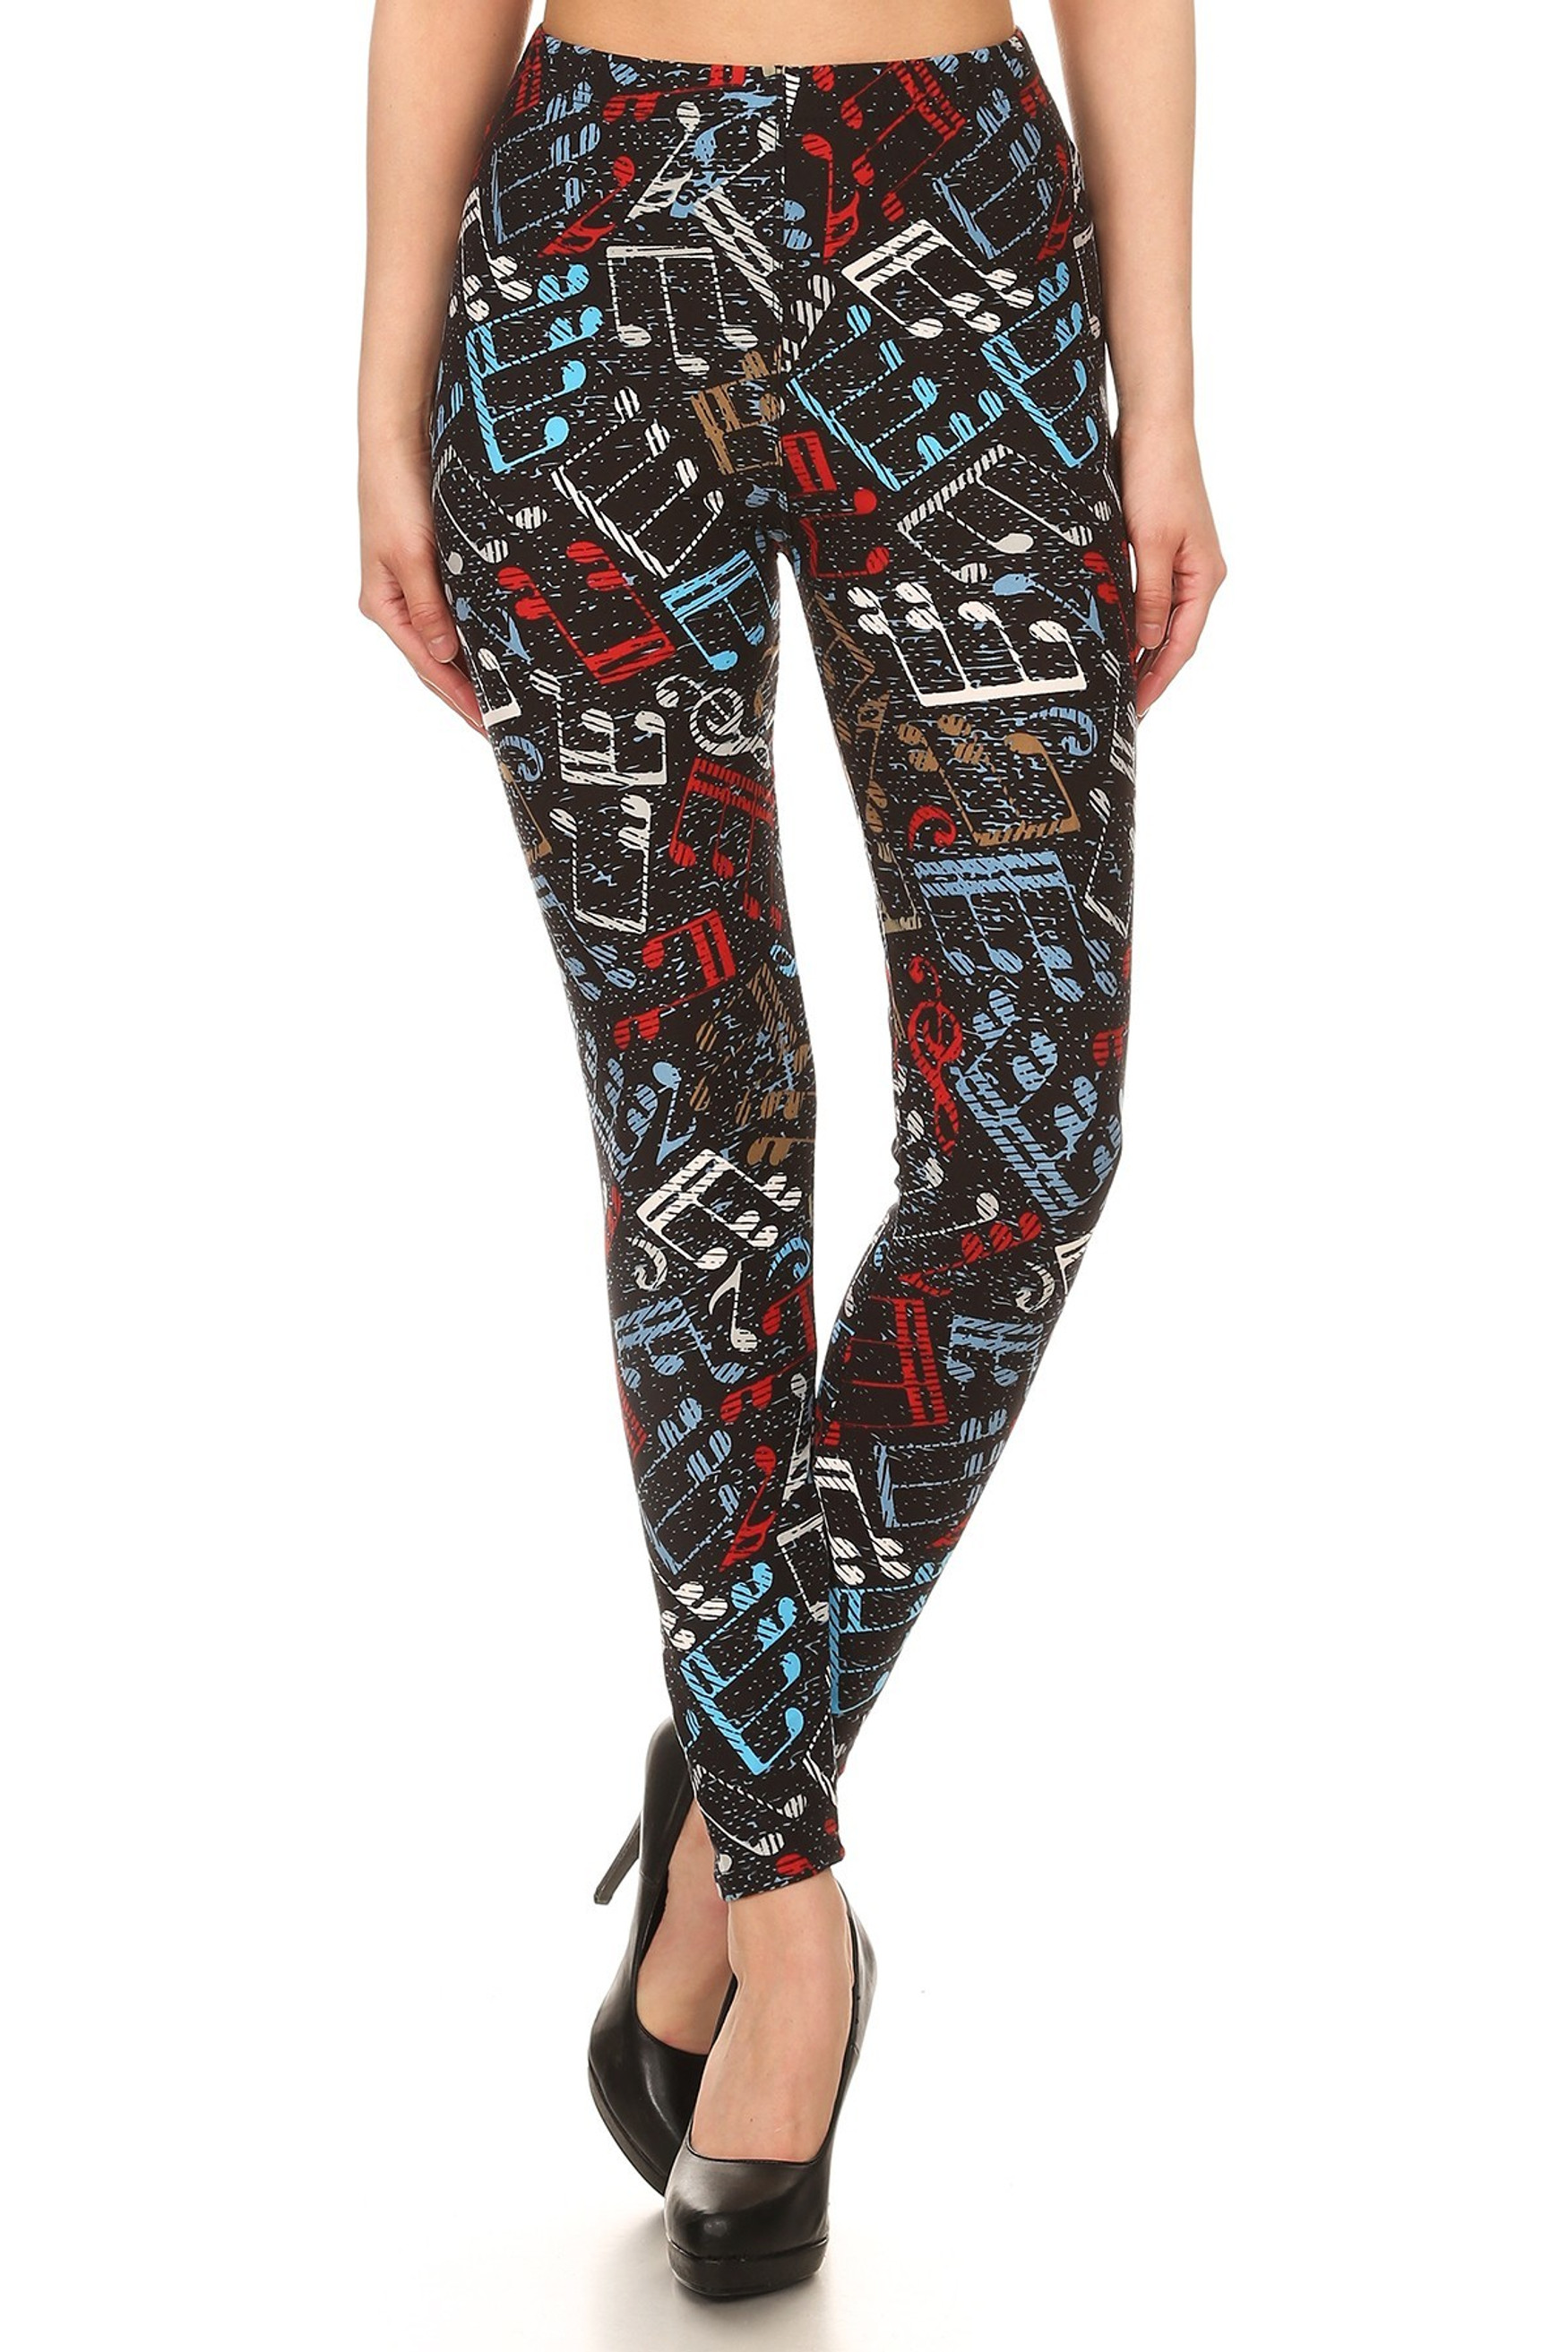 Buttery Soft Colorful Music Note Extra Plus Size Leggings - 3X-5X